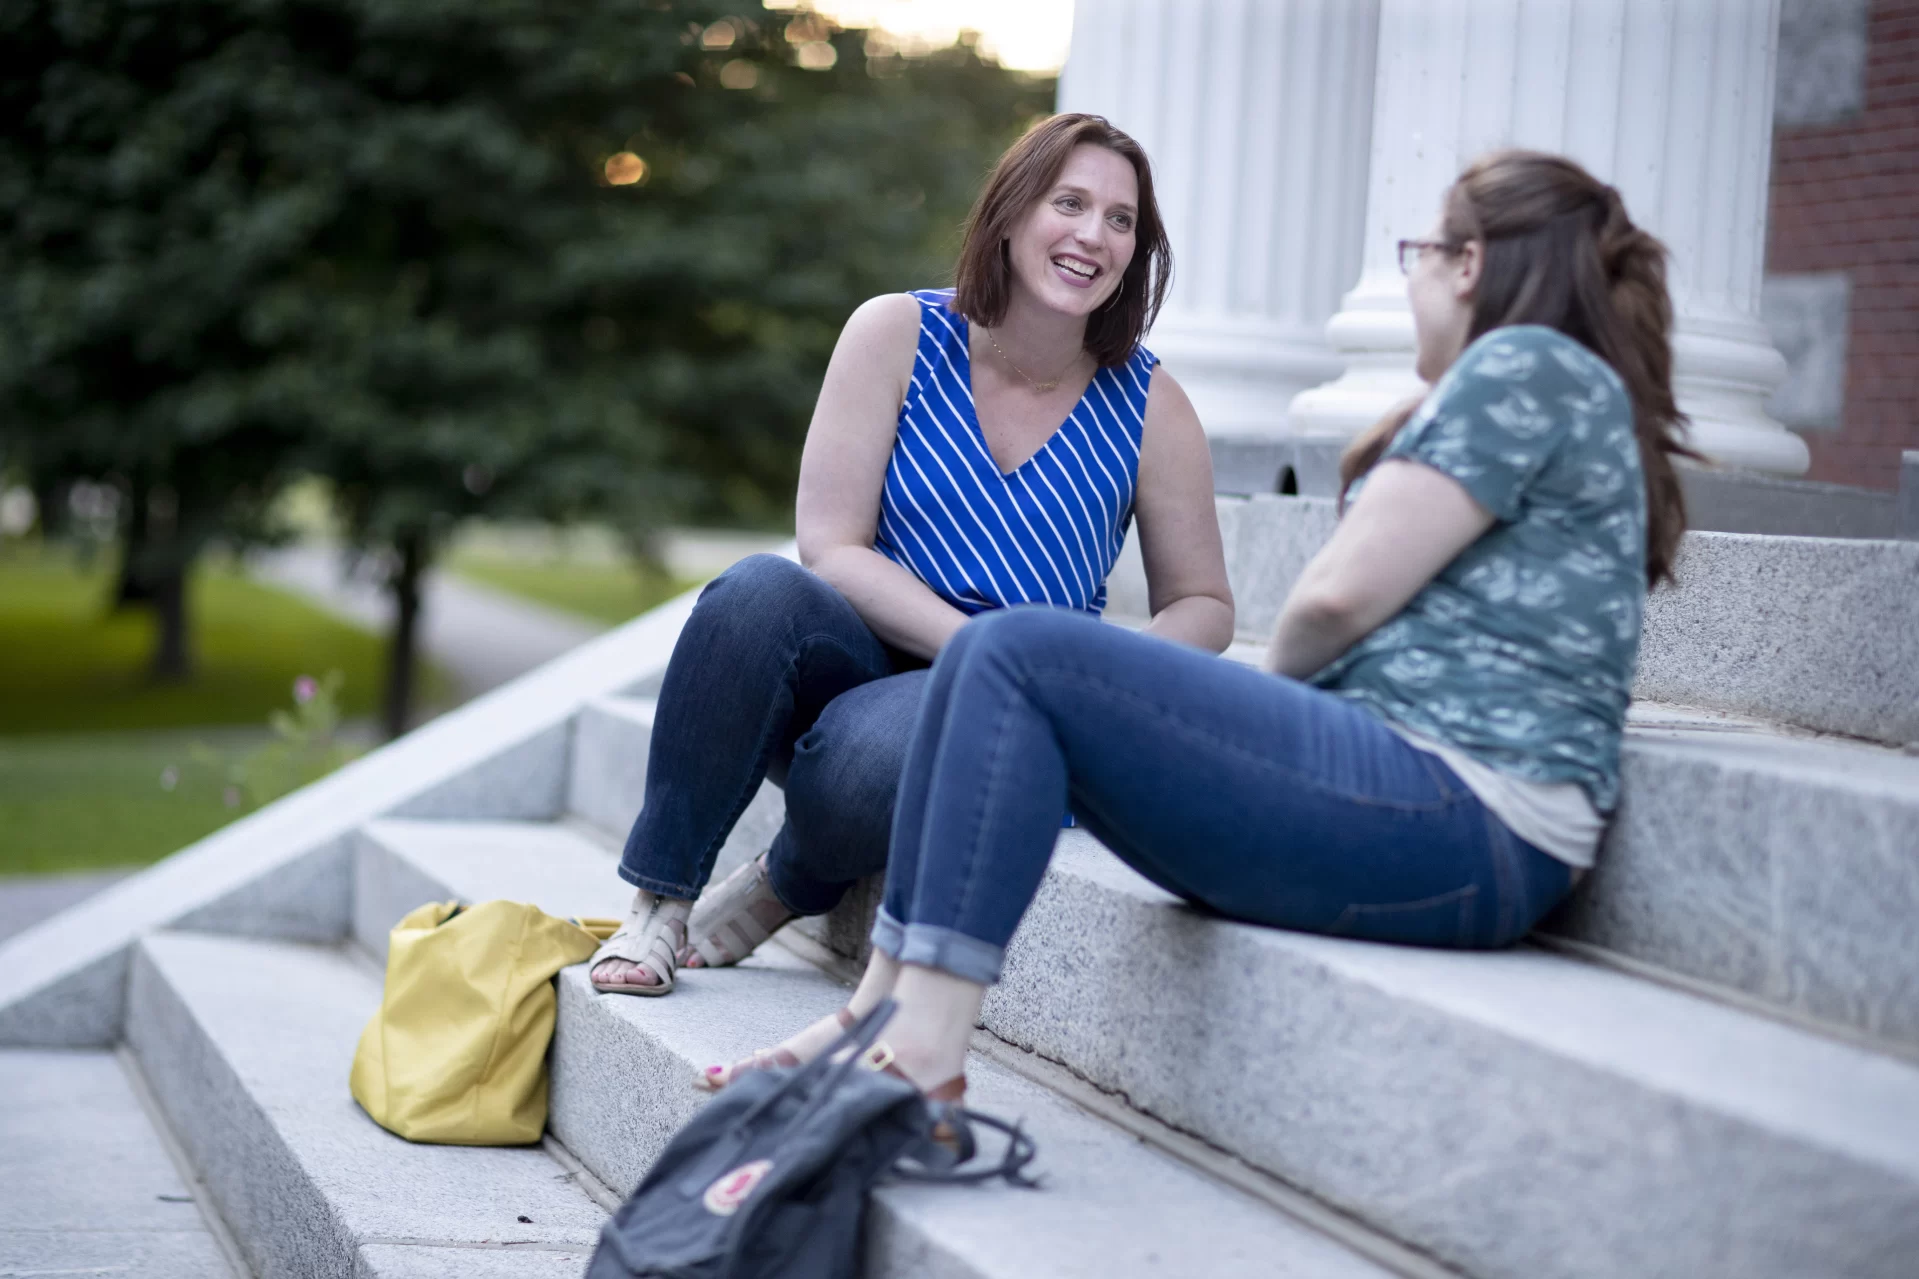 "I attribute everything to John Kelsey."
.
— It's catchup time for Lindsey Hamilton '05, director of undergraduate research at the University of Colorado, Denver, (left) and Jennifer Ambrose Lyford '04 of Durham, Maine, (right), as they reconnect on a summer evening on the steps of Hathorn Hall.
.
Hamilton, commenting on her mentor Professor Emeritus of Psychology John Kelsey, was a neuroscience major while at Bates and has returned to campus as a participant in one of several Gordon Research Conferences held at Bates each summer.
.
“My experience at Bates was so transformative as an undergraduate researcher that I want to create that opportunity for all of my Colorado students," Hamilton says.
.
"I just keep going back to my own experiences. How was I selected to do research? What were those touches that kept me involved? And now I’m trying to scale that to the University of Colorado."